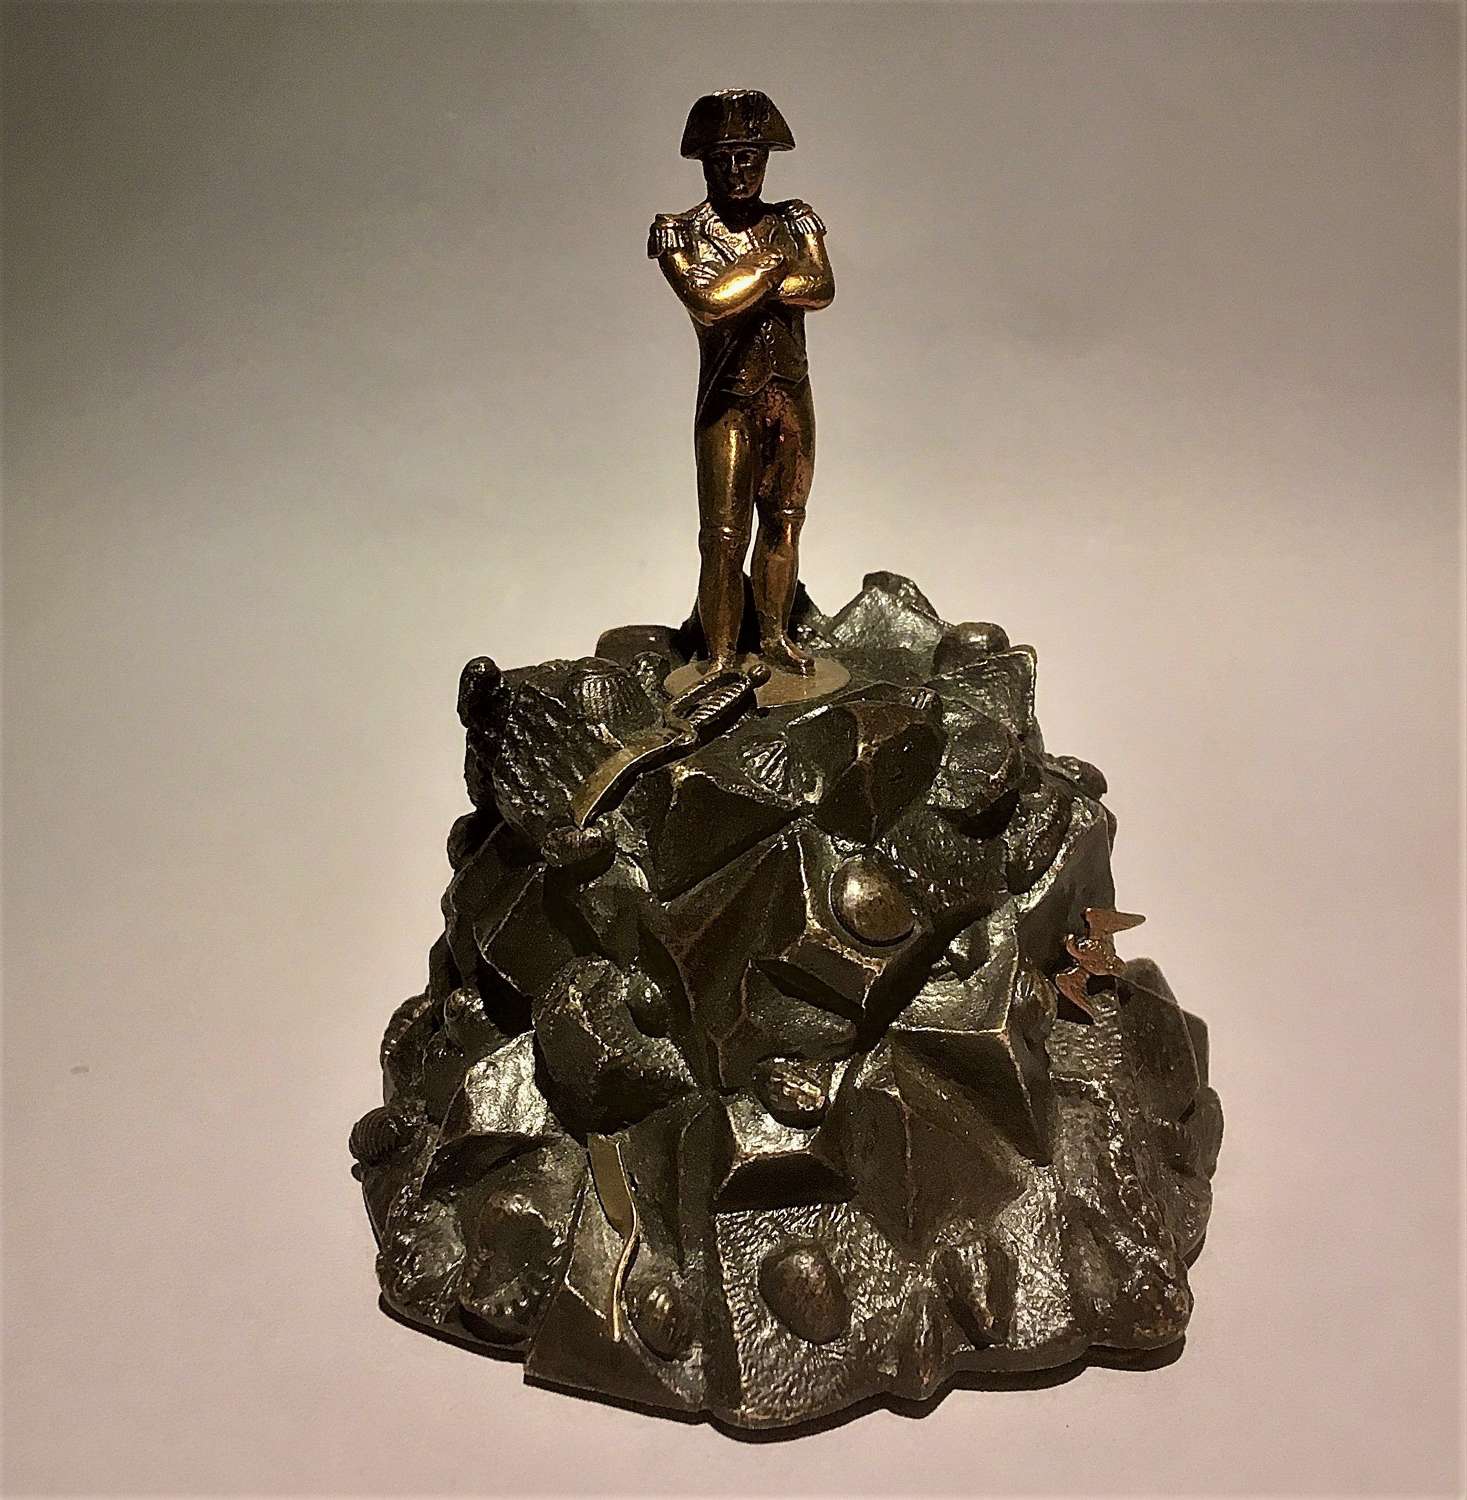 A small bronze sculpture of Napoleon standing on a rocky outcrop